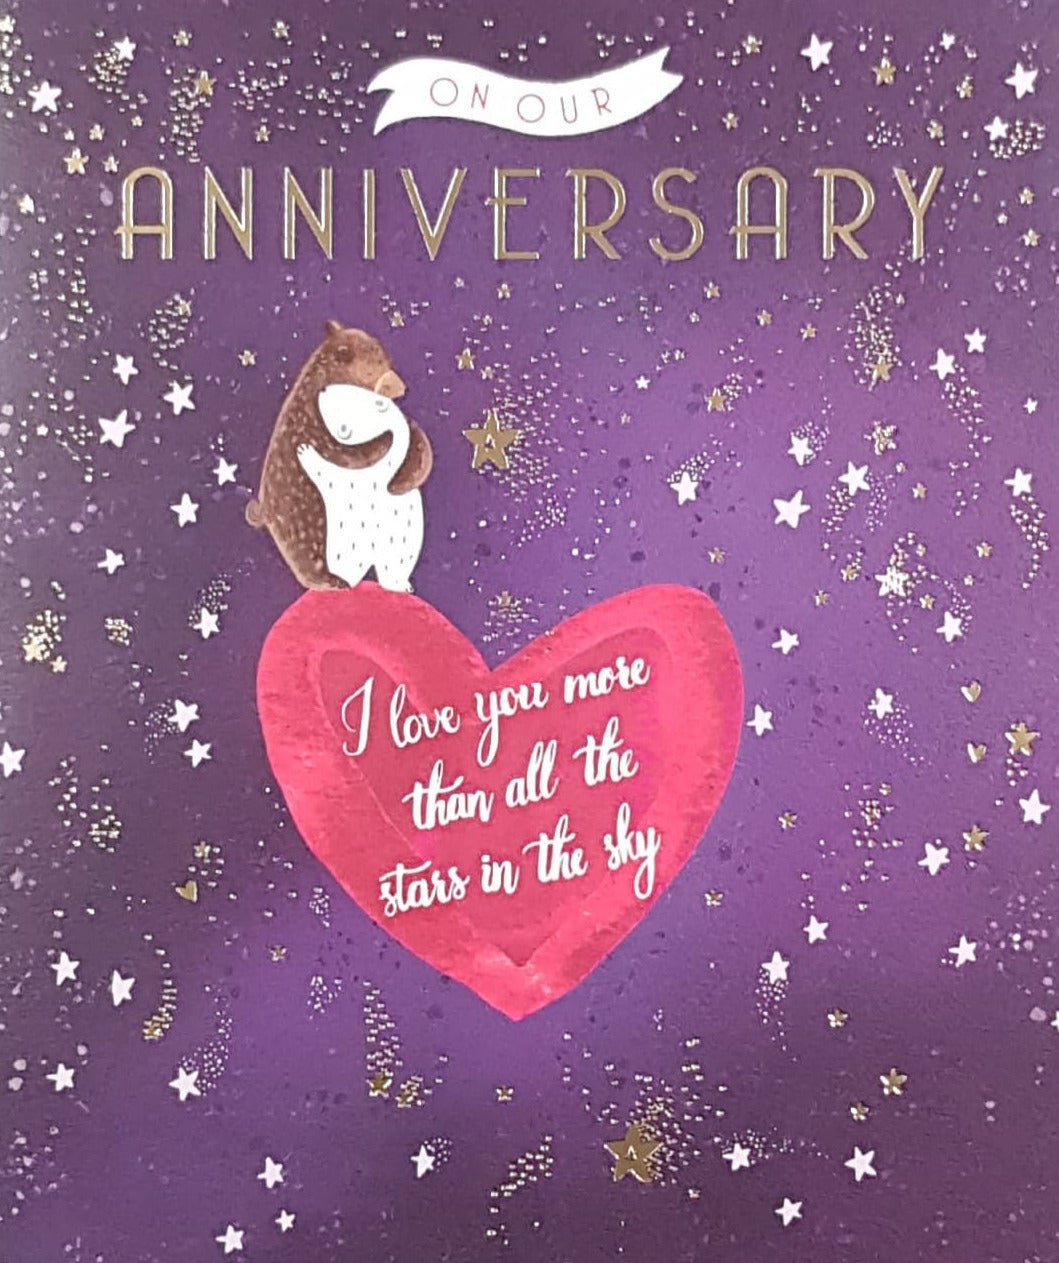 Anniversary Card - On Our Anniversary / Two Bears Hugging On A Heart In Night Sky